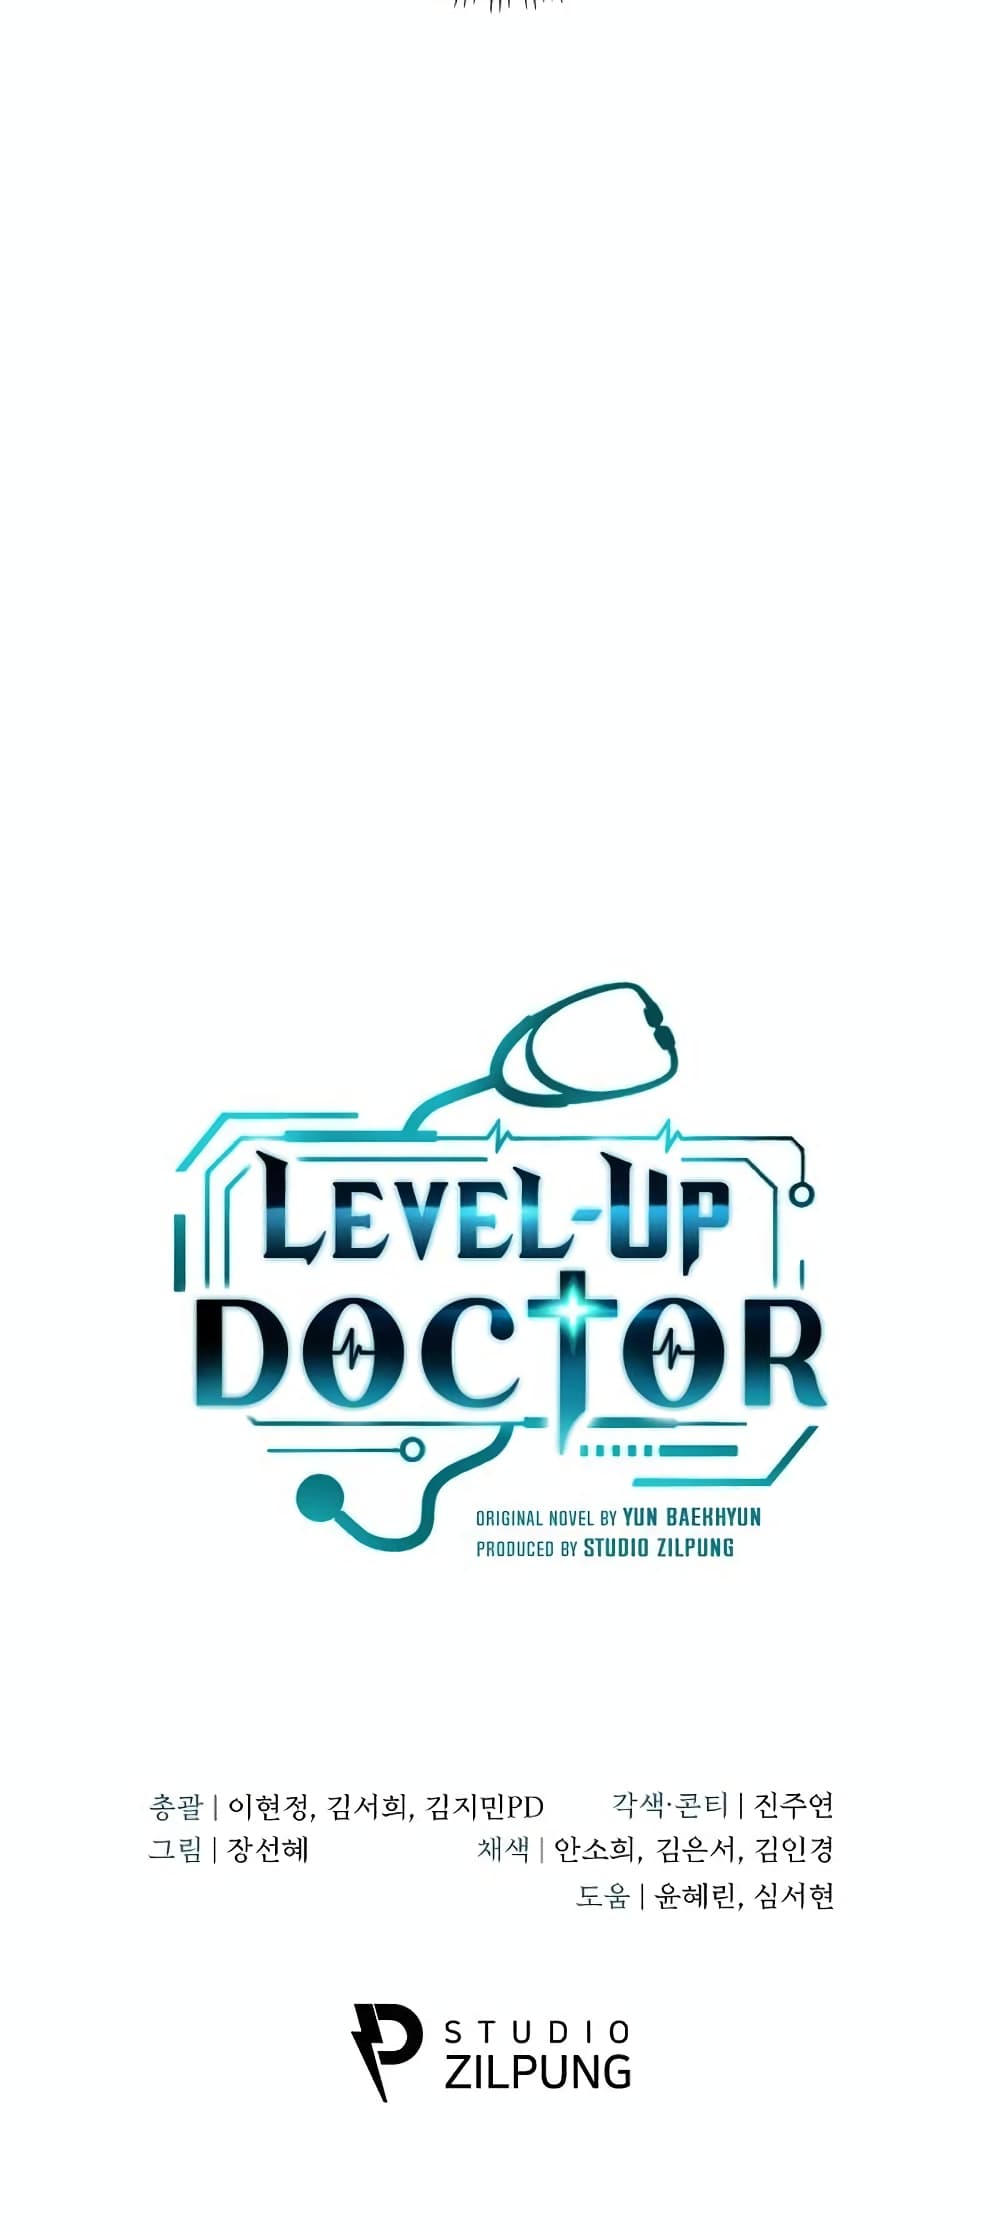 Level Up Doctor 26 51